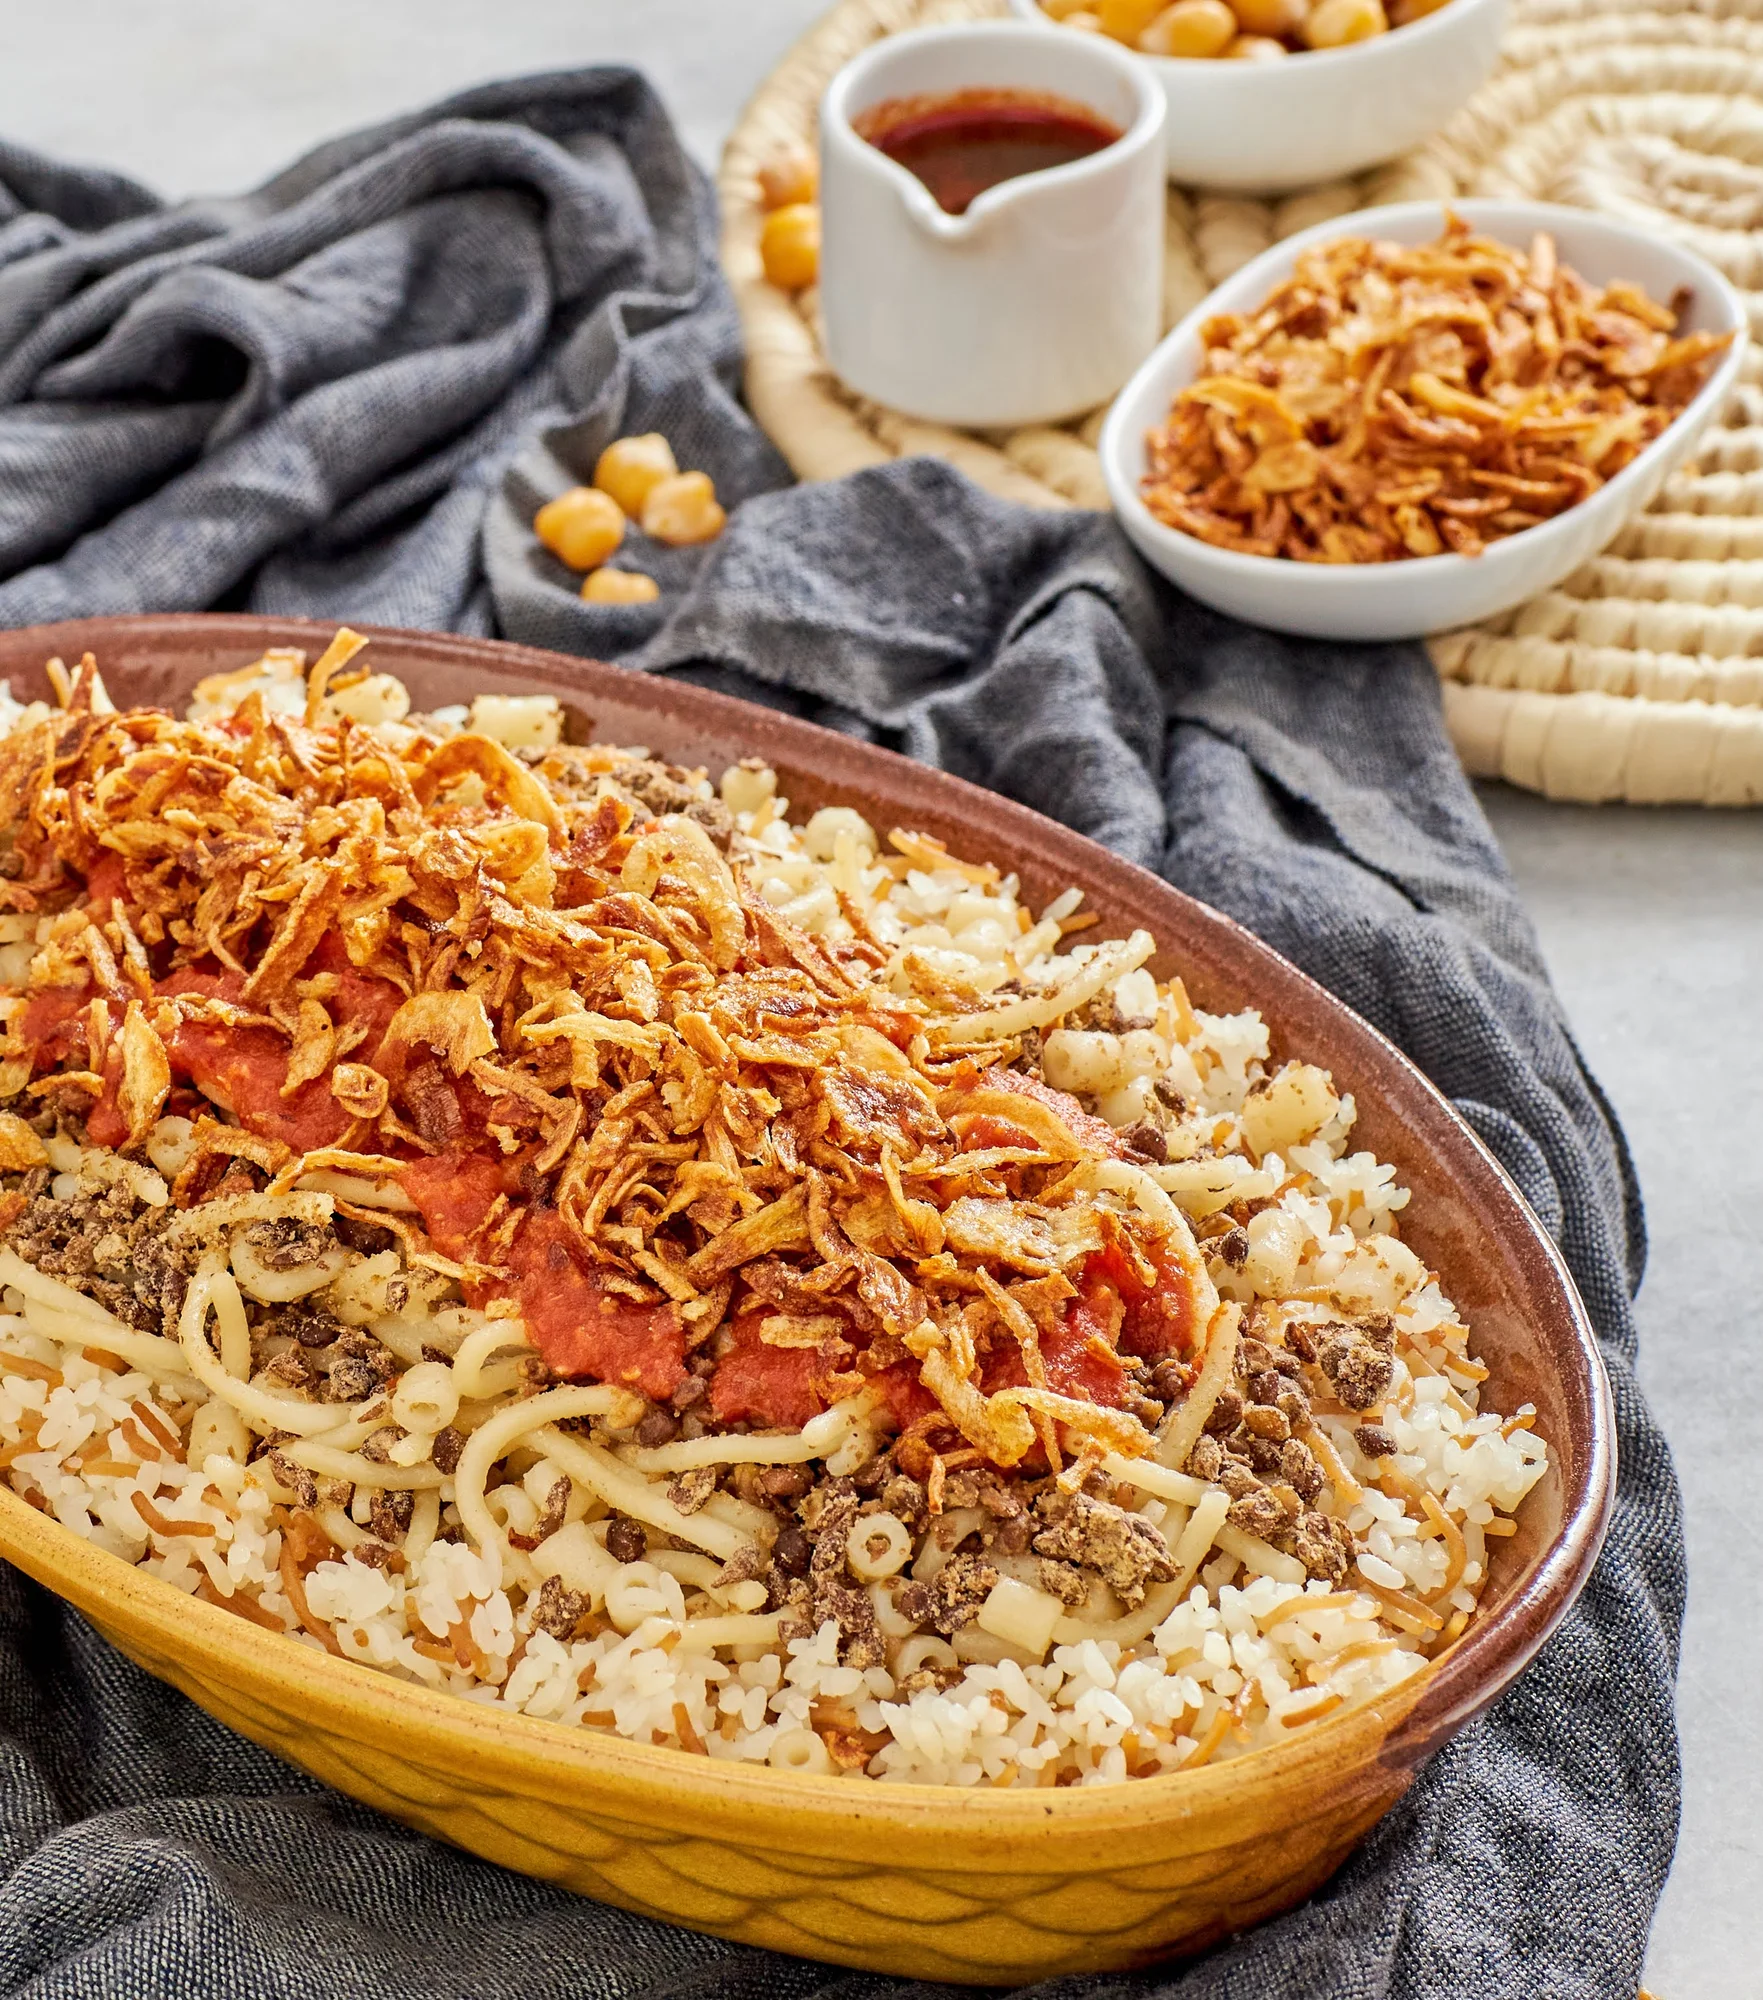 Savory Egyptian dish with pasta, lentils, rice, and crispy onions in a tomato sauce.